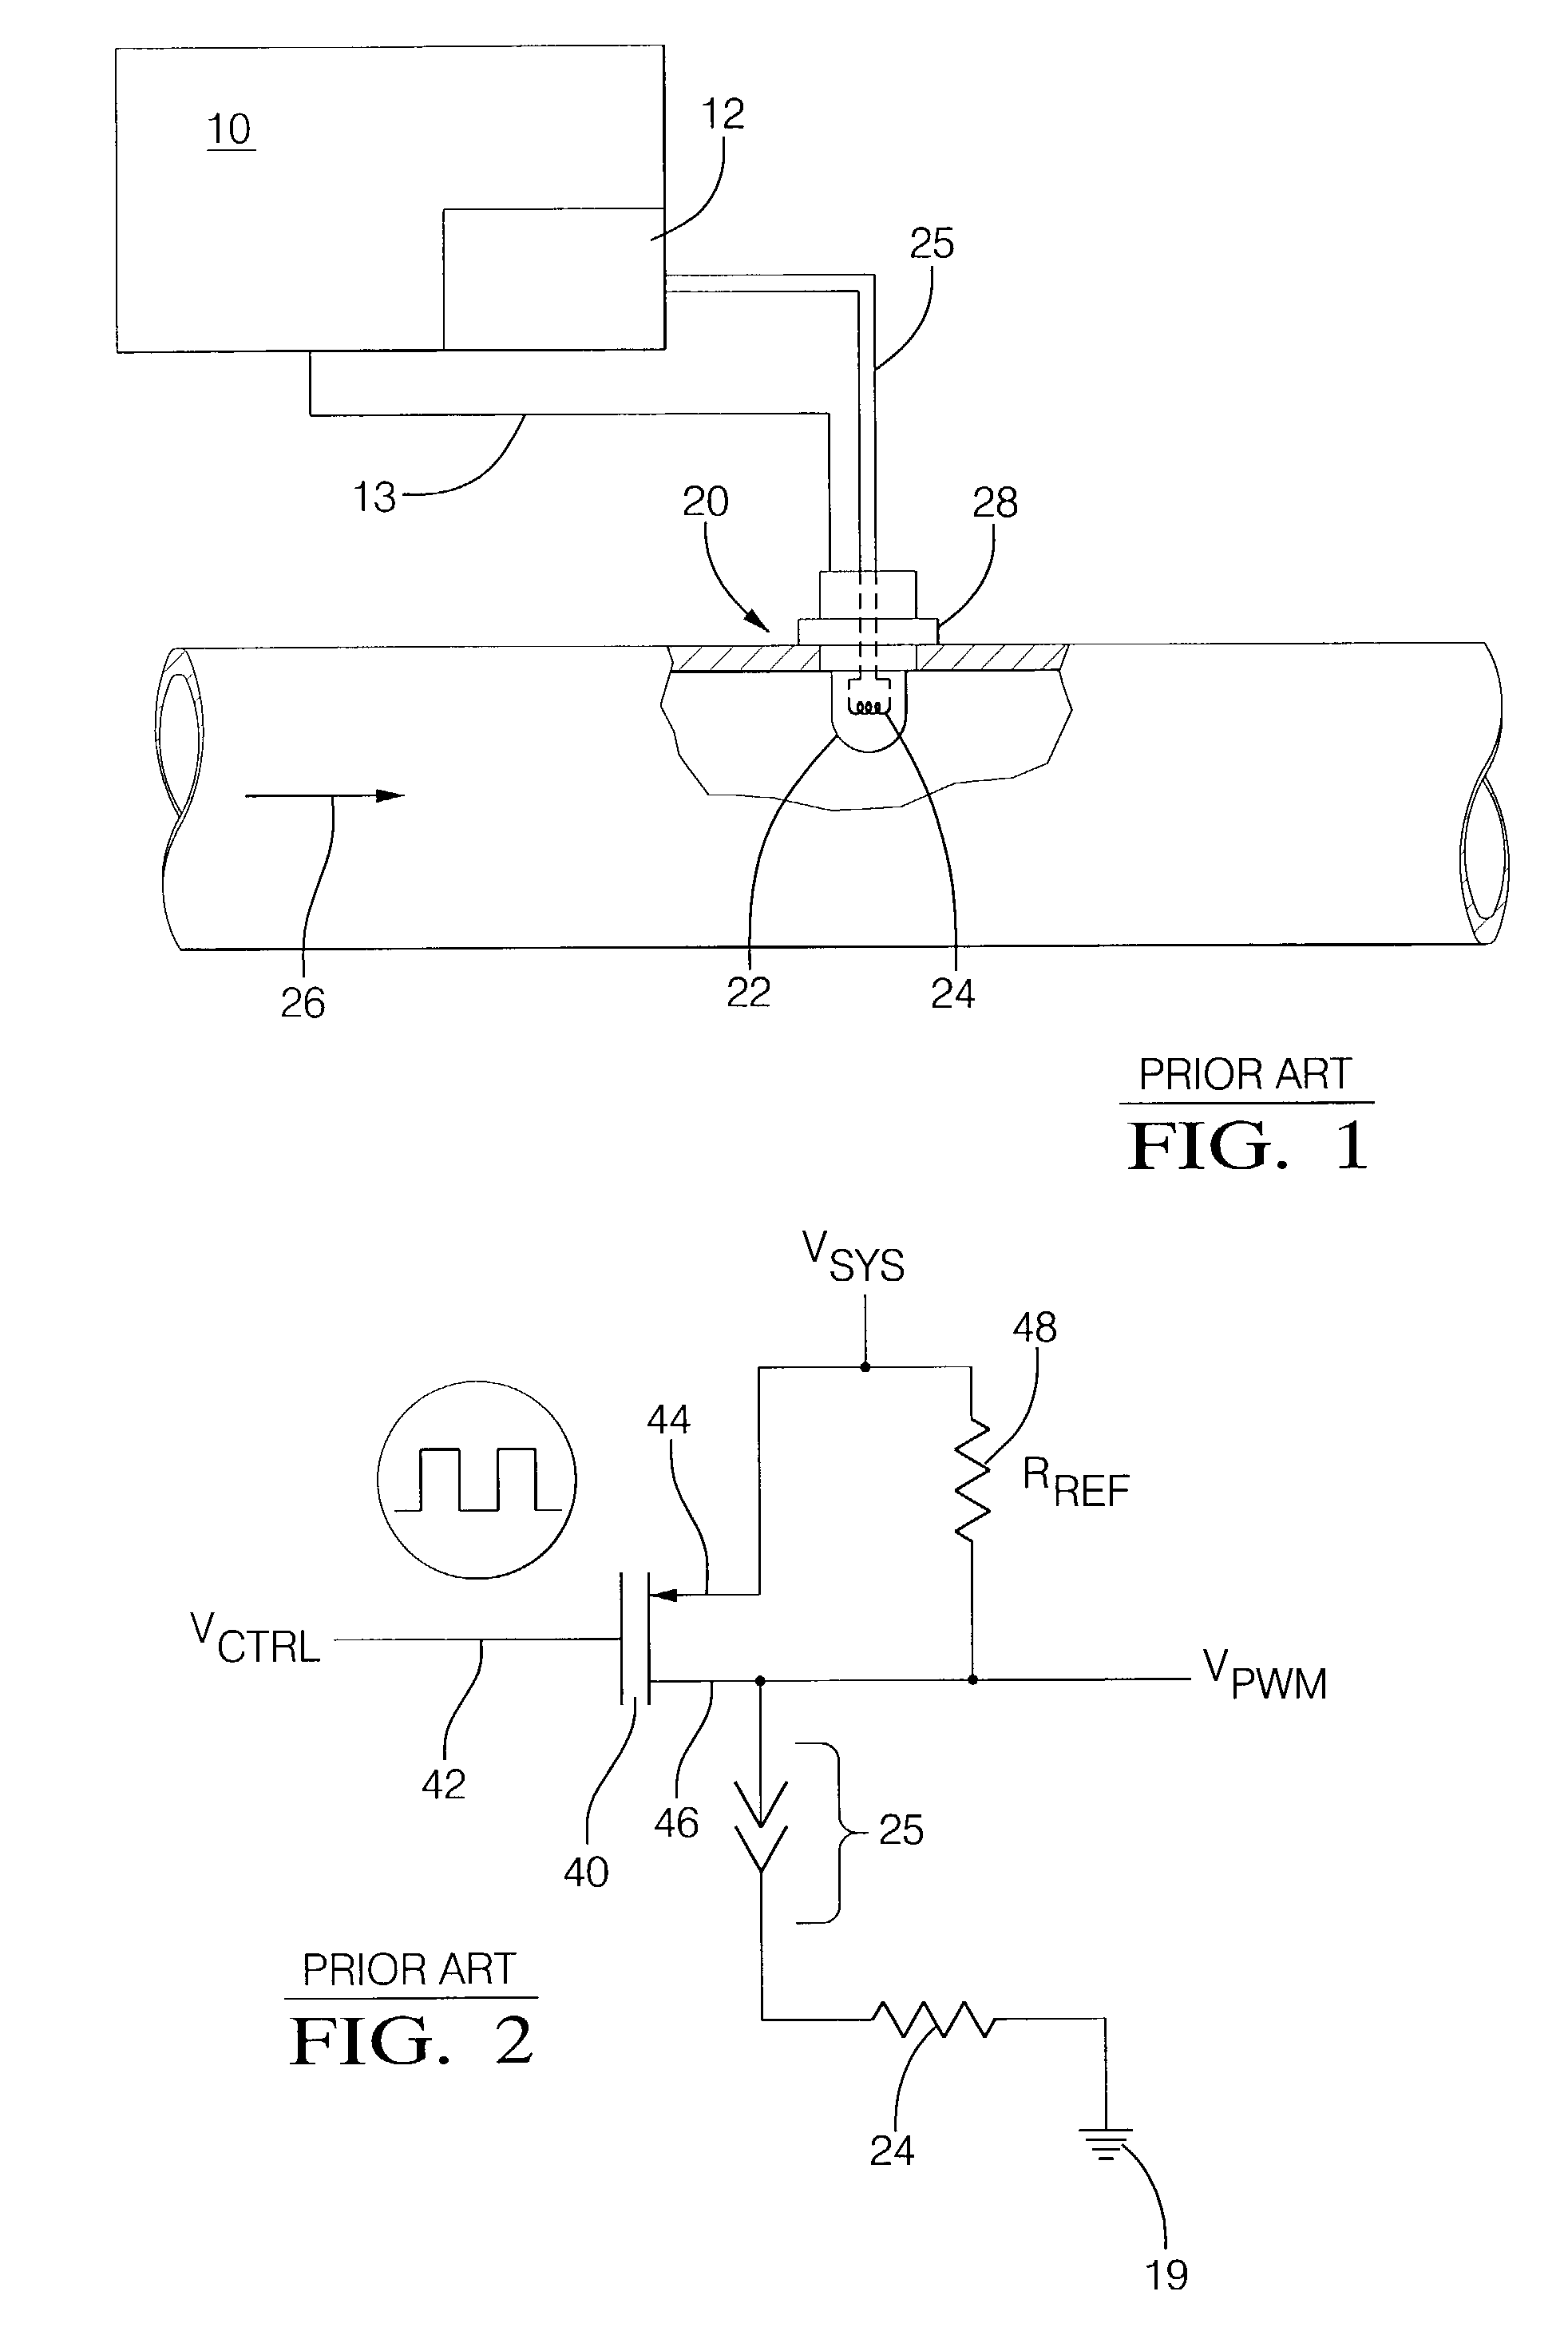 Method and apparatus to control an exhaust gas sensor to a predetermined termperature